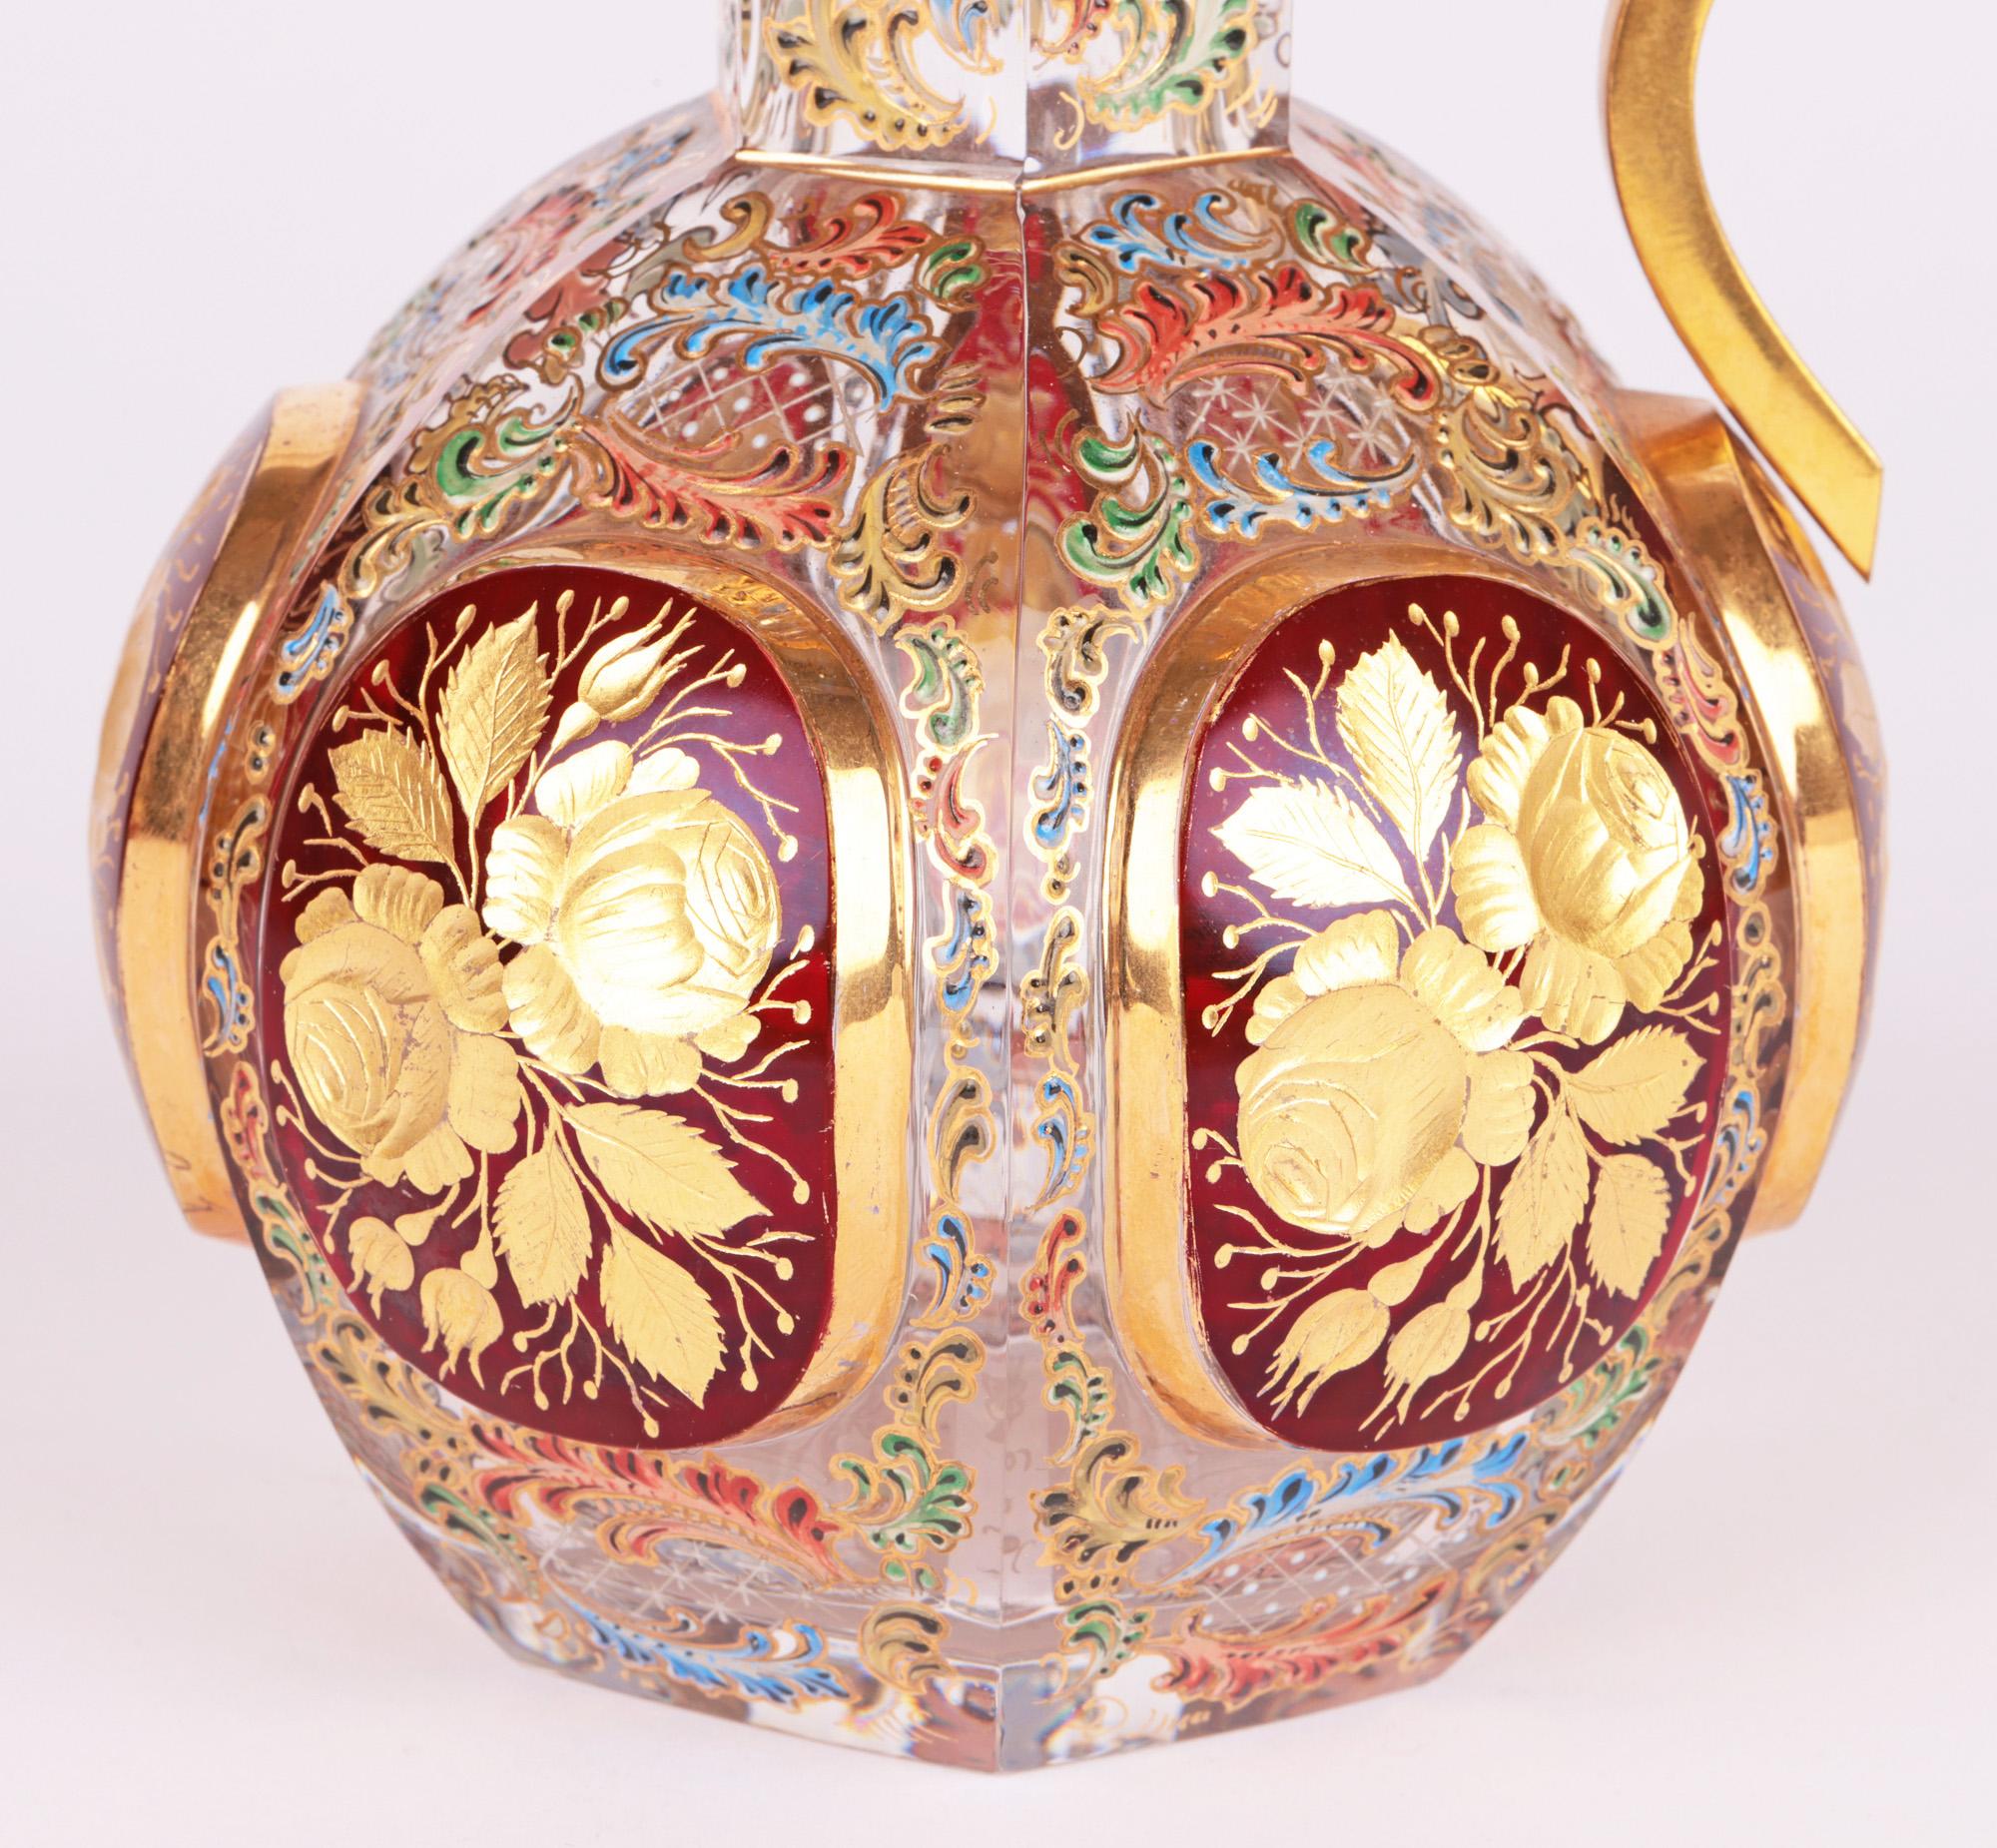 An exceptional Moser Biedermeier attributed Bohemian enamelled and cut glass handled ewer with gilded metal mount dating from the 19th century. This beautifully made ewer is of hexagonal shape and made in thick clear glass standing on a narrow flat